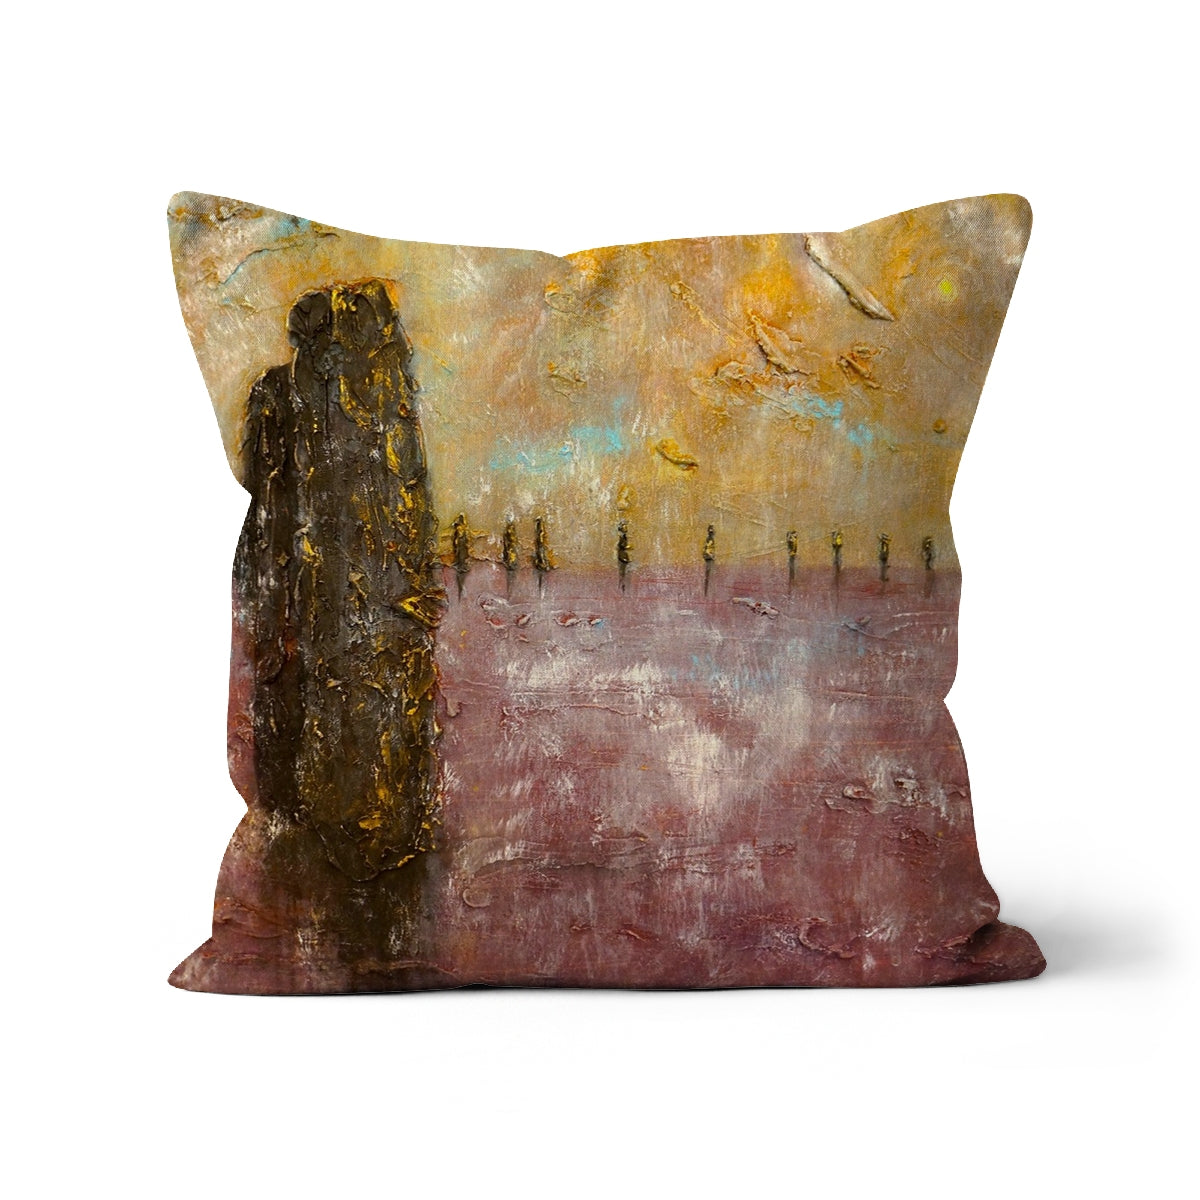 Bordgar Mist Orkney Art Gifts Cushion-Cushions-Orkney Art Gallery-Faux Suede-18"x18"-Paintings, Prints, Homeware, Art Gifts From Scotland By Scottish Artist Kevin Hunter